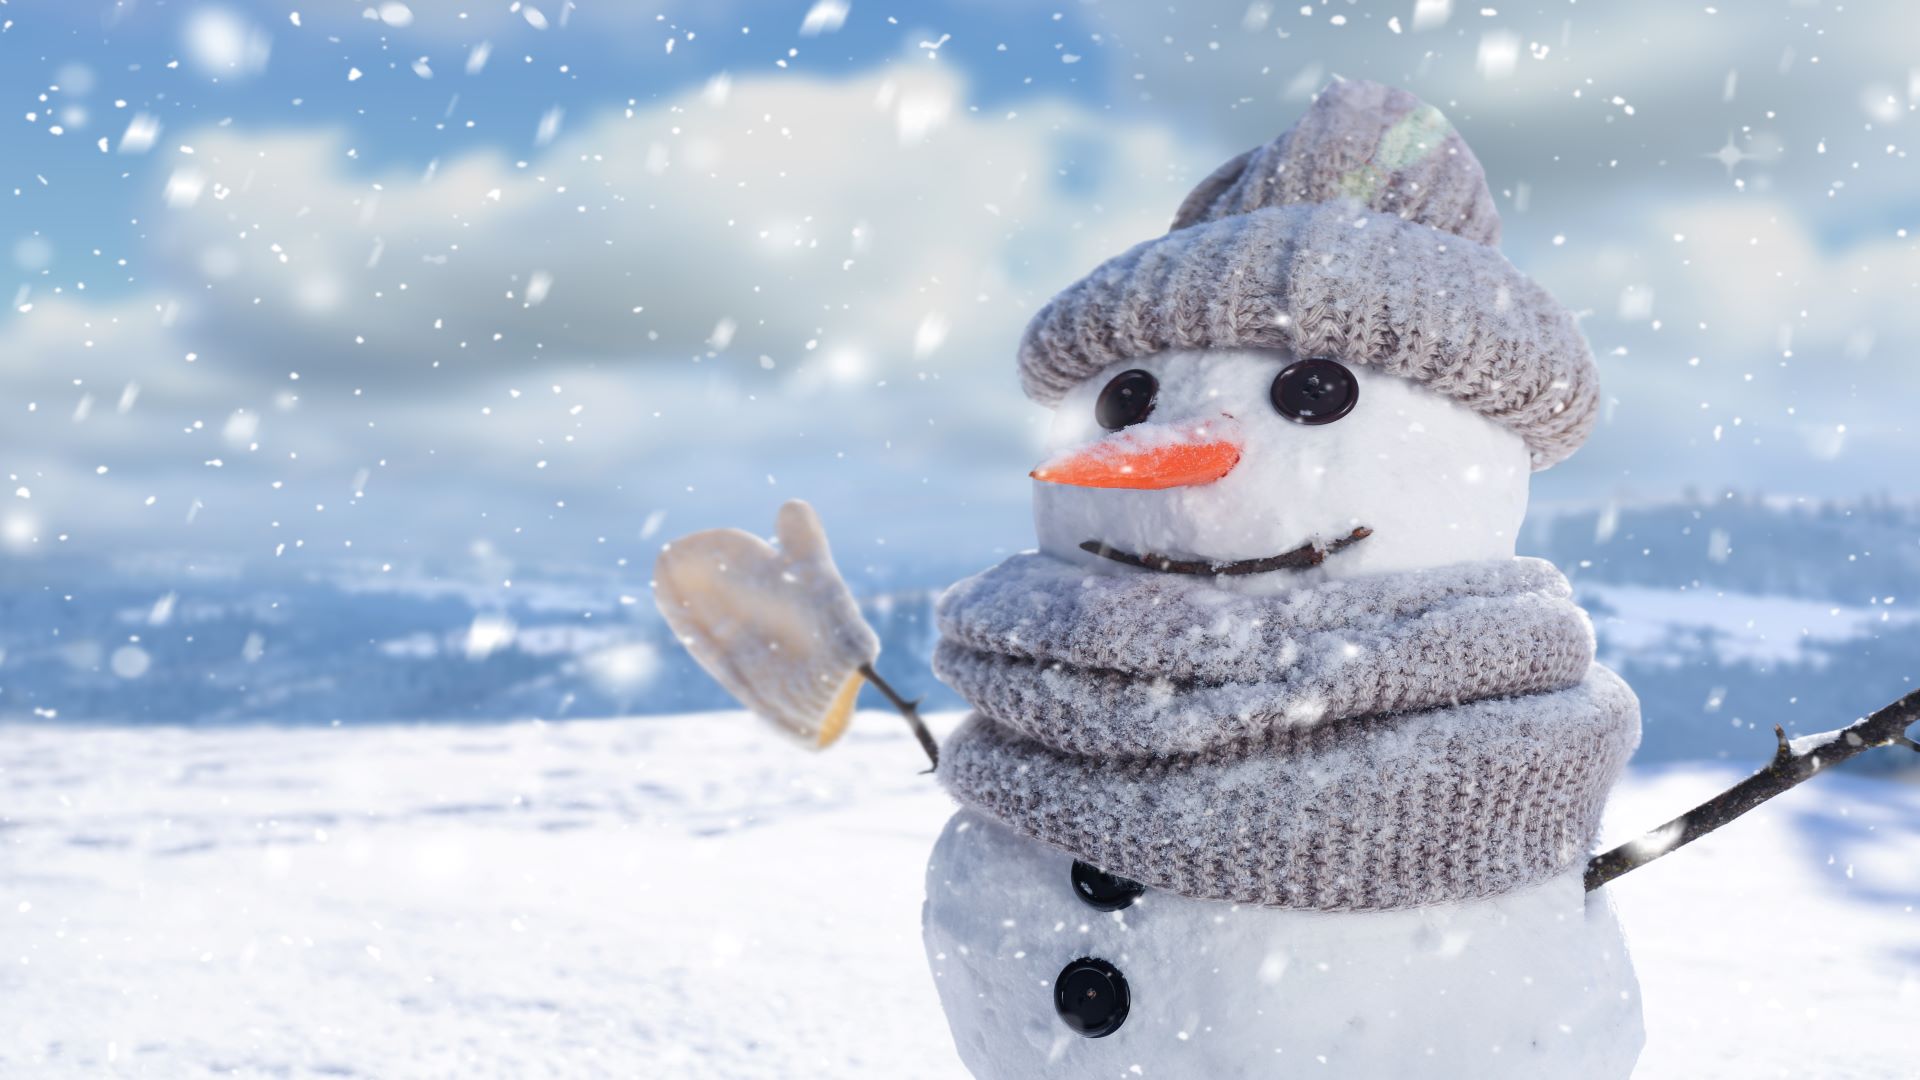 How to build a snowman: 5 tips for success